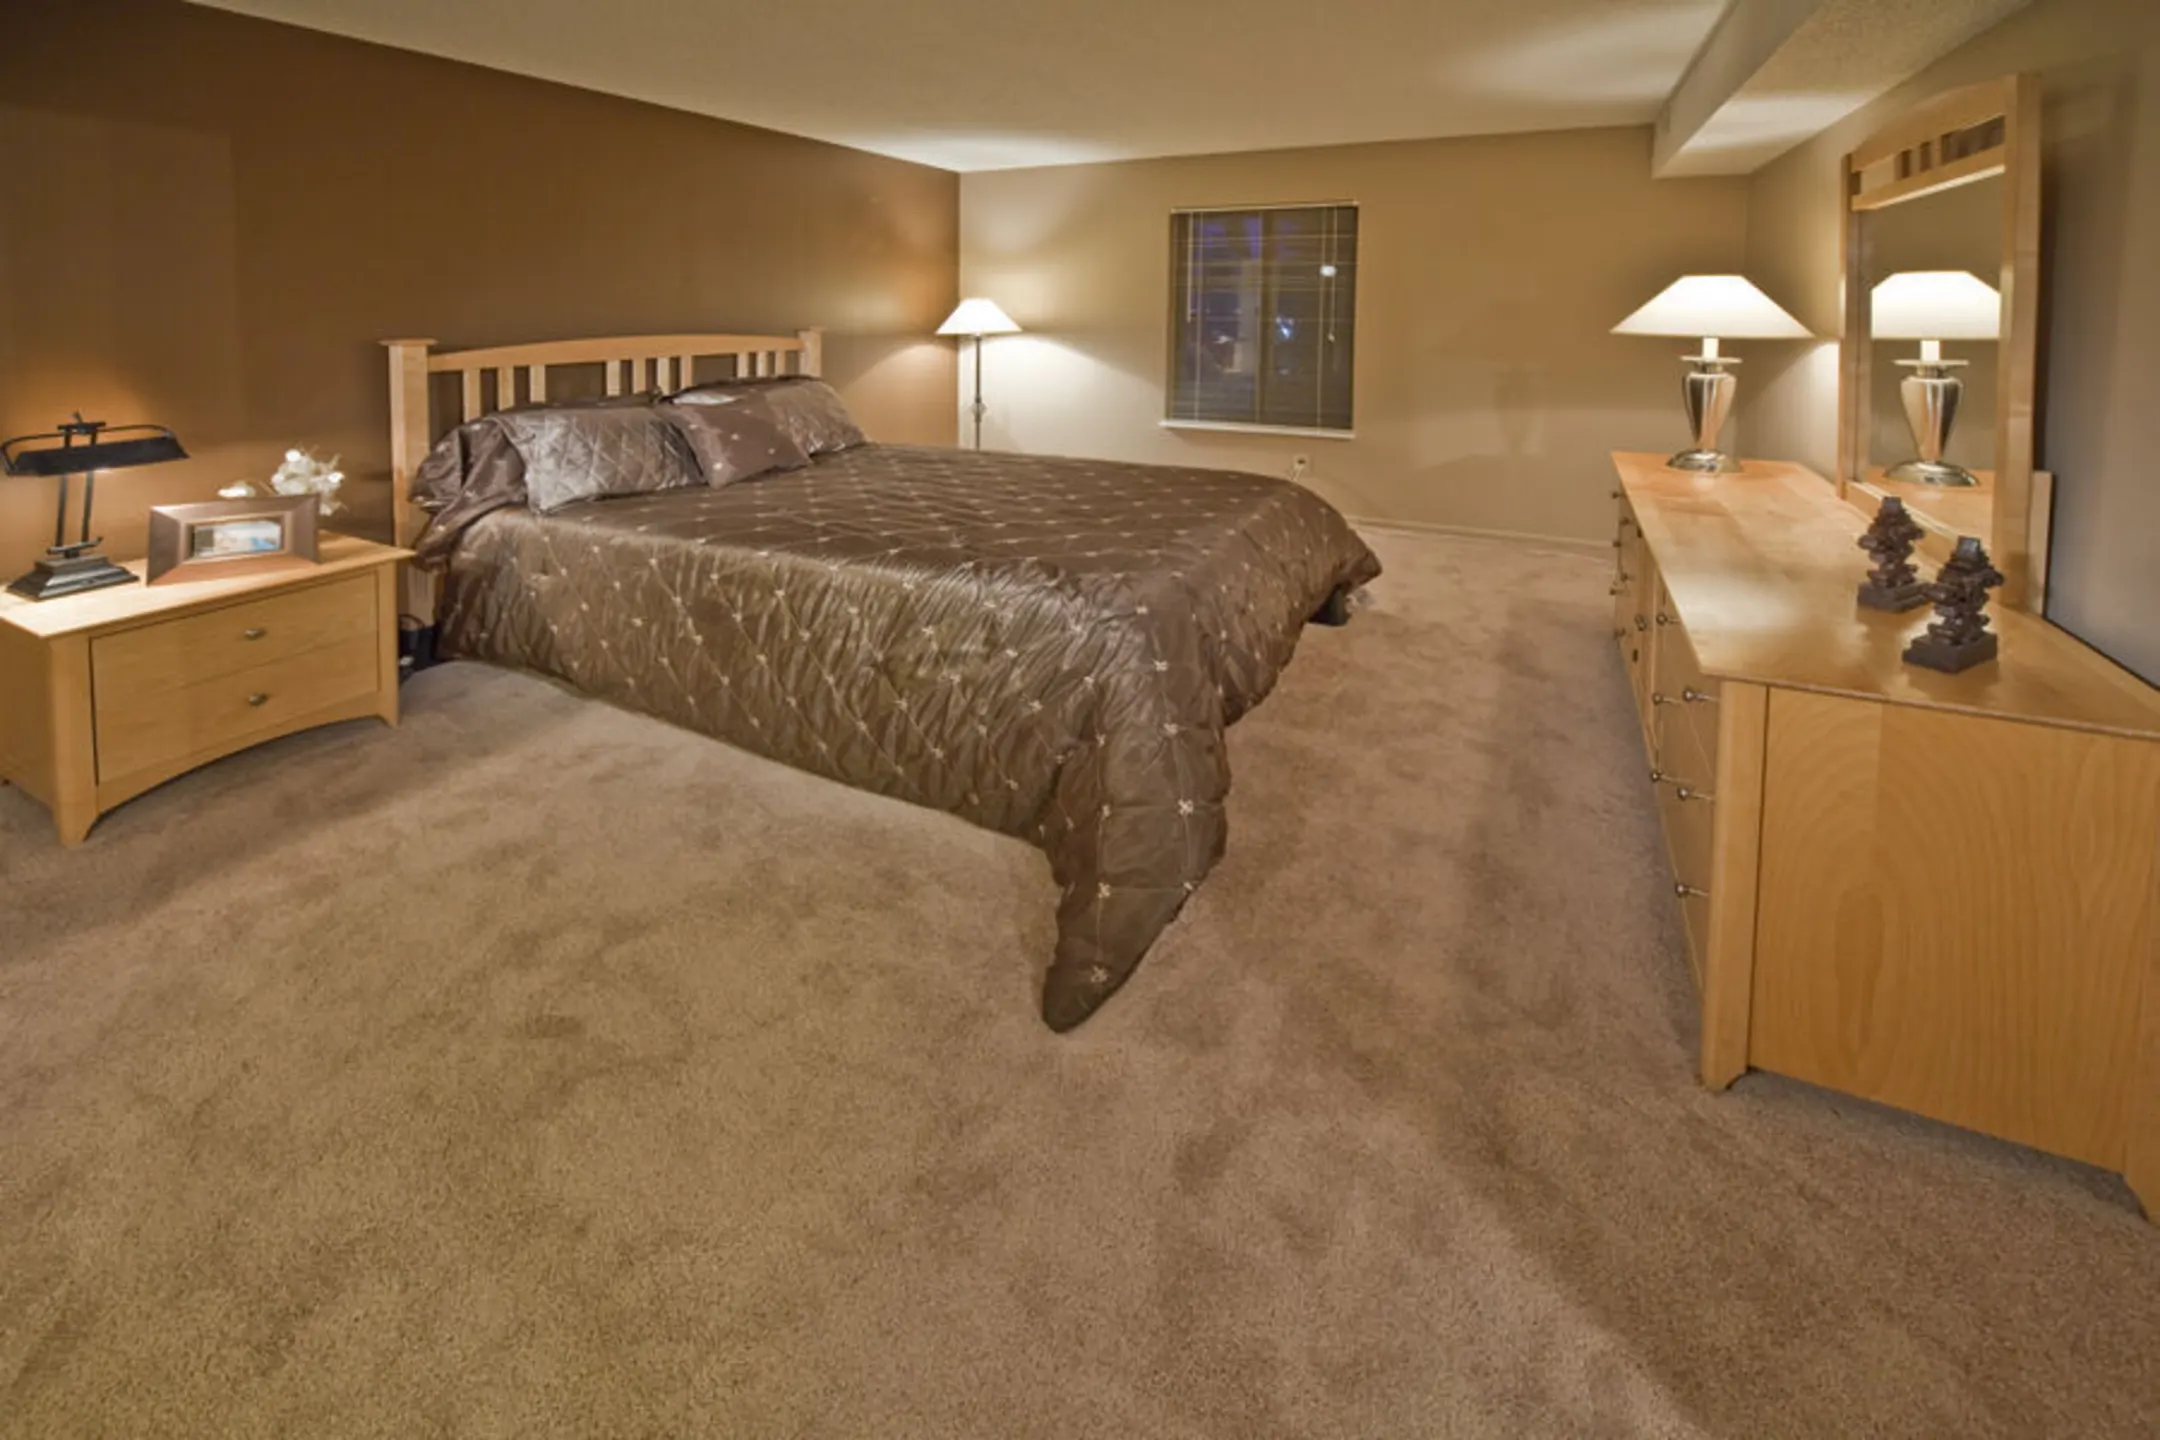 Bedroom - Landmark Apartments & Townhomes - Indianapolis, IN